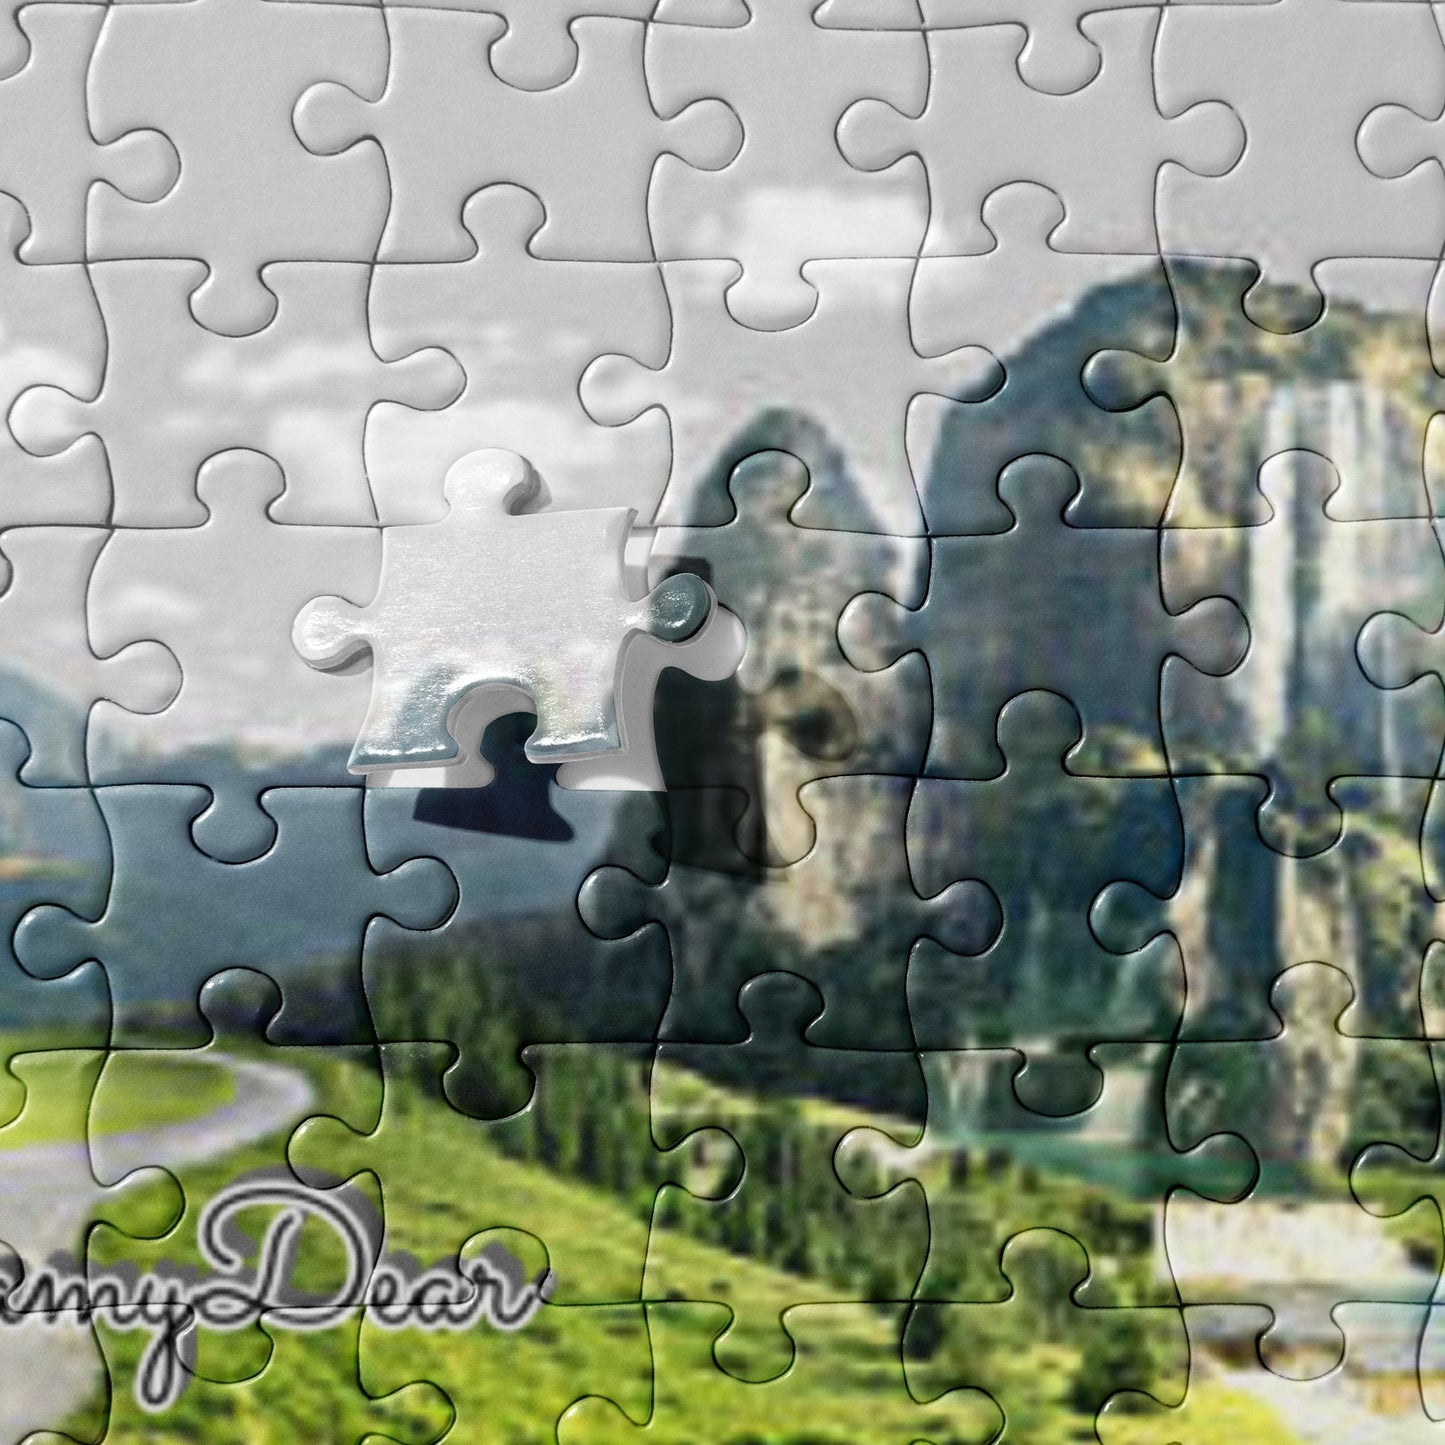 "The Flying Fortress" puzzle